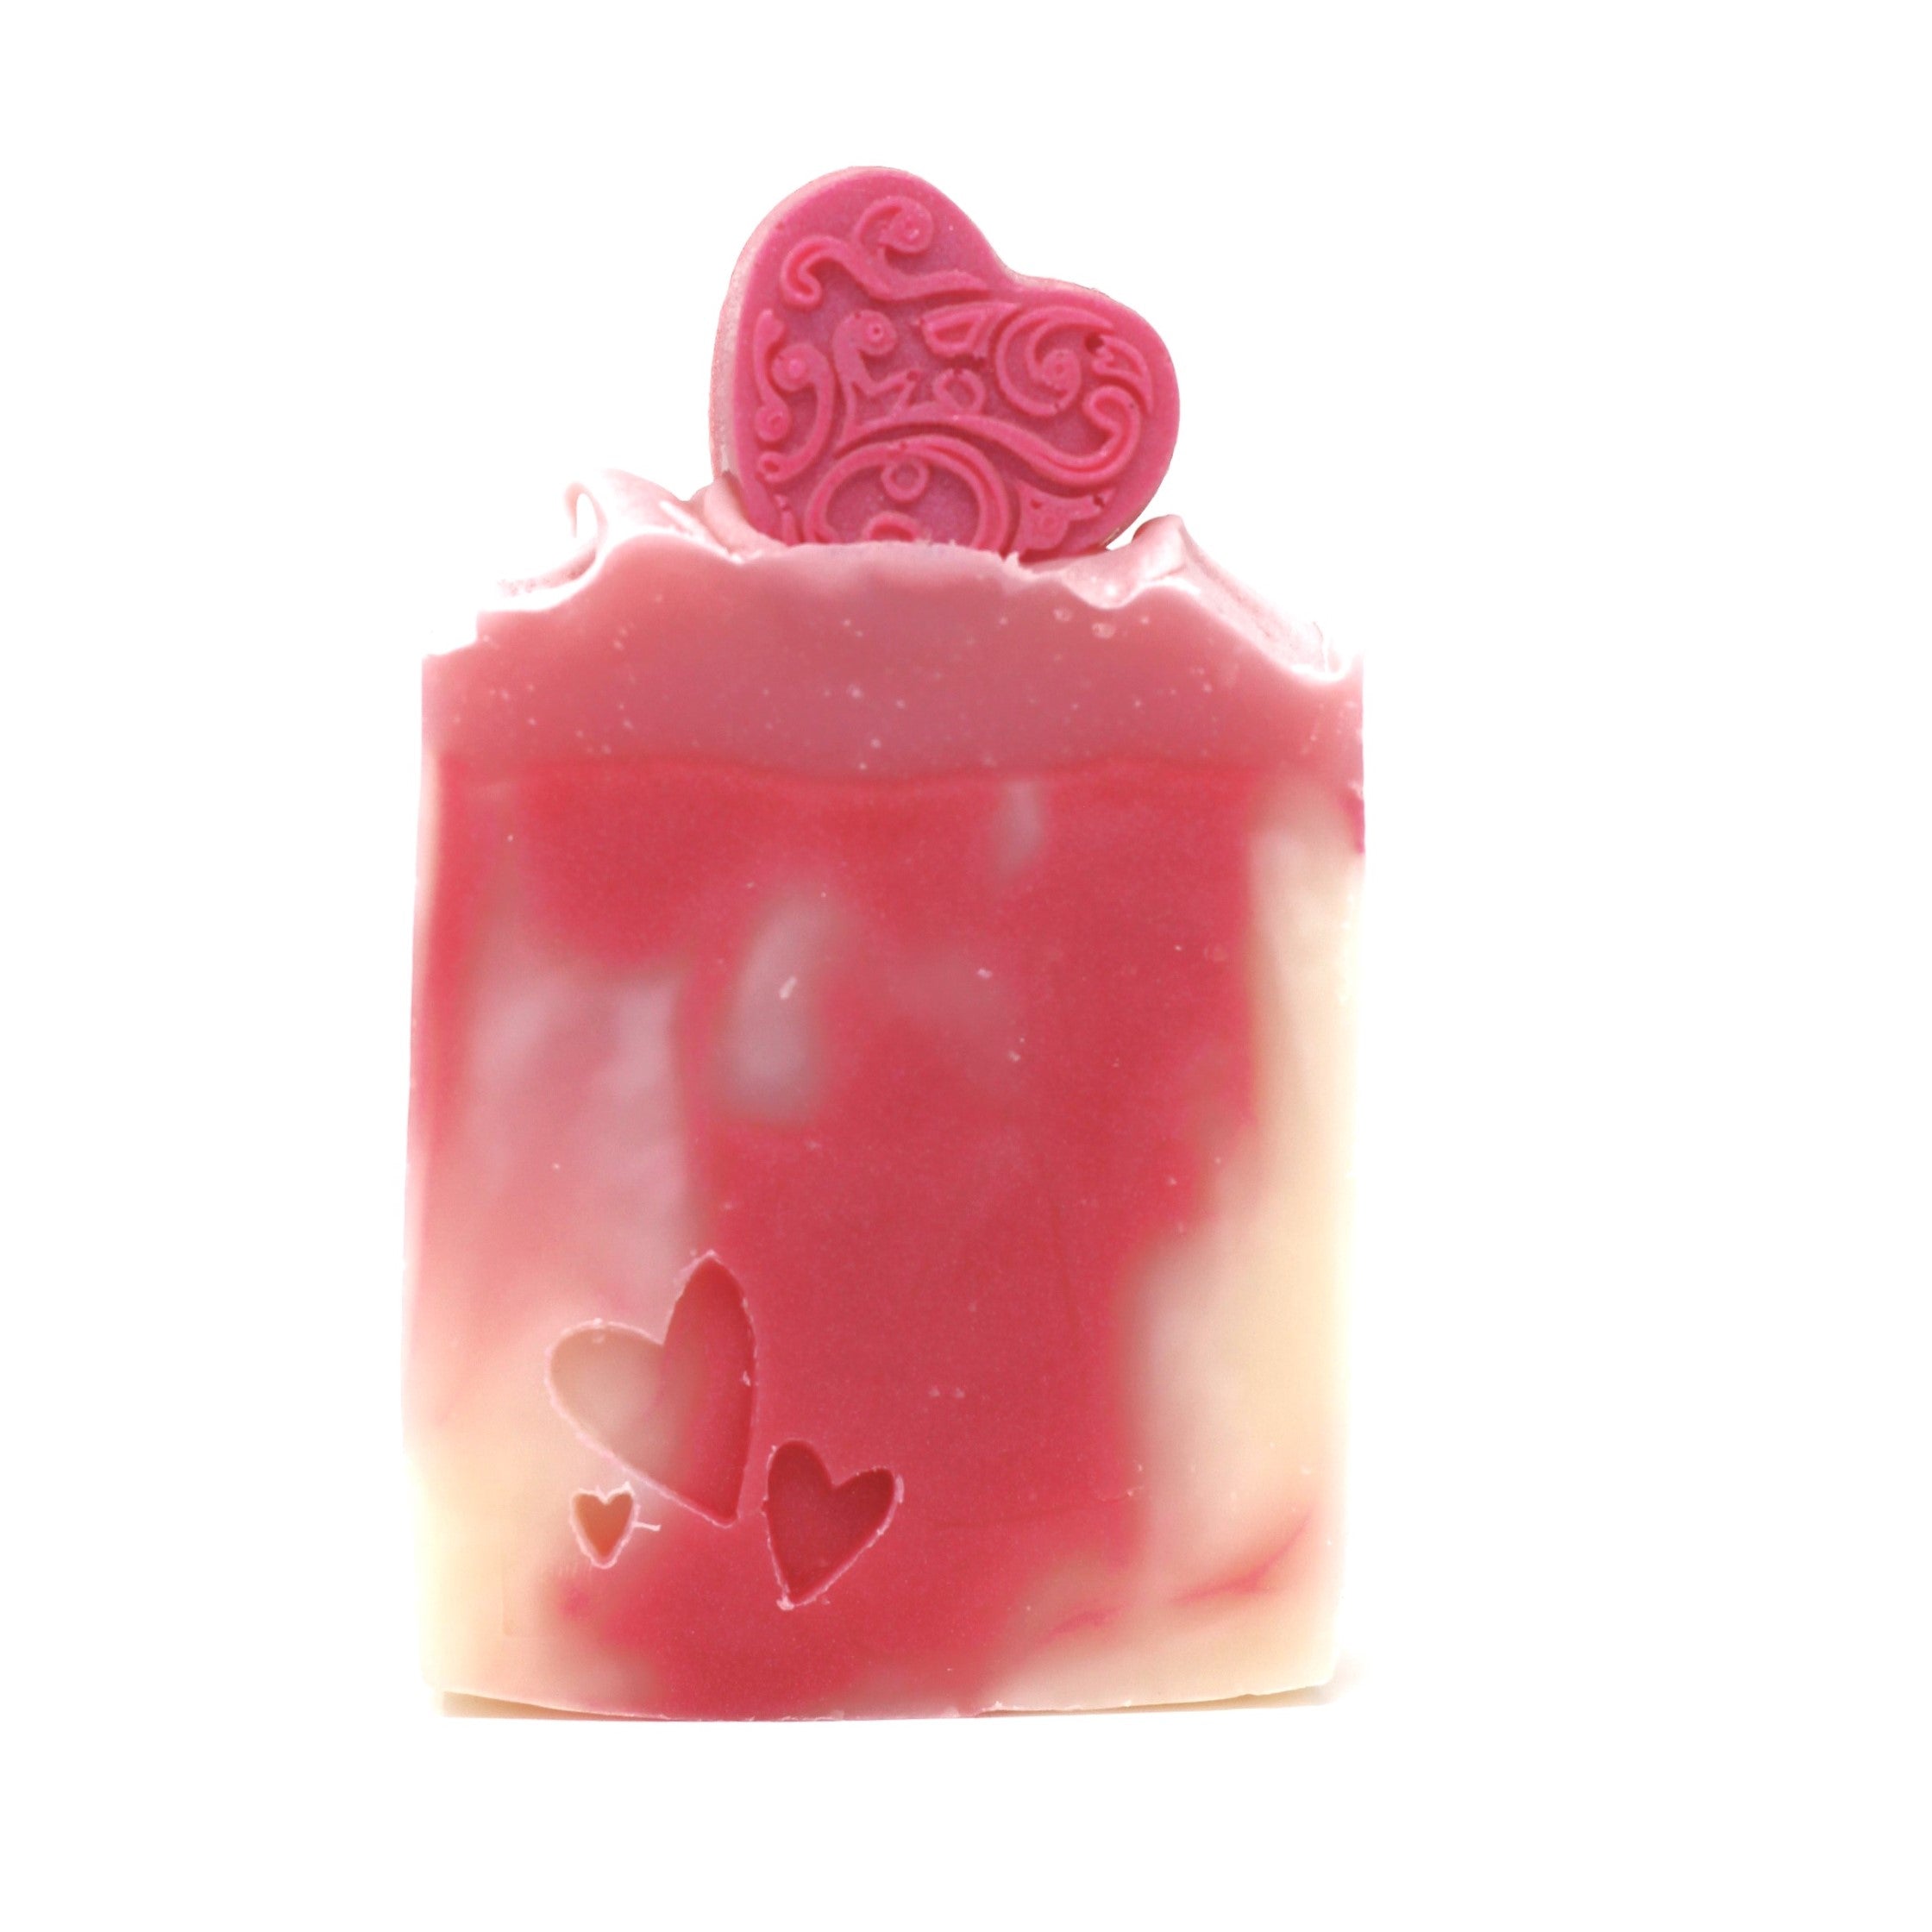 Faerhaven Artisan Bar Soap - Love Note (Limited Edition)